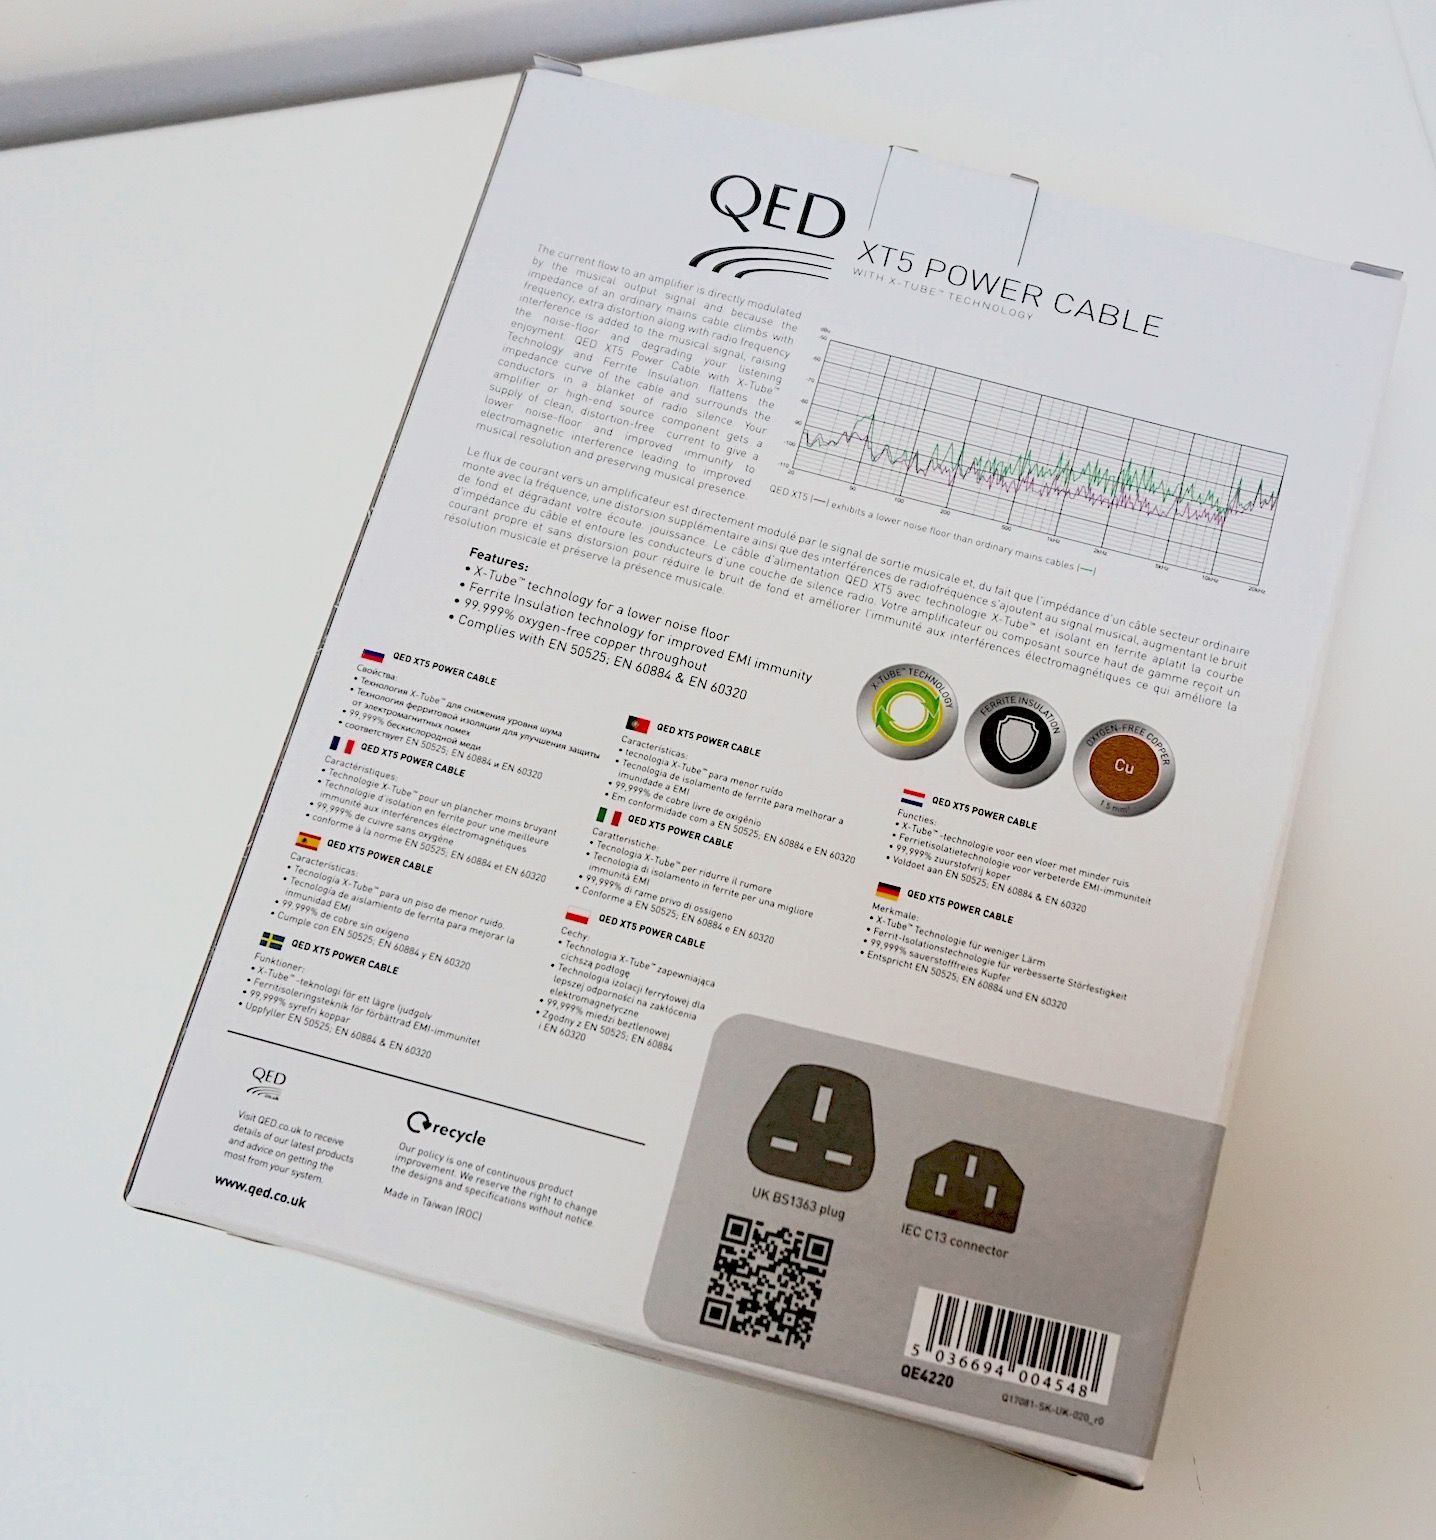 XT5 Mains Cable From QED